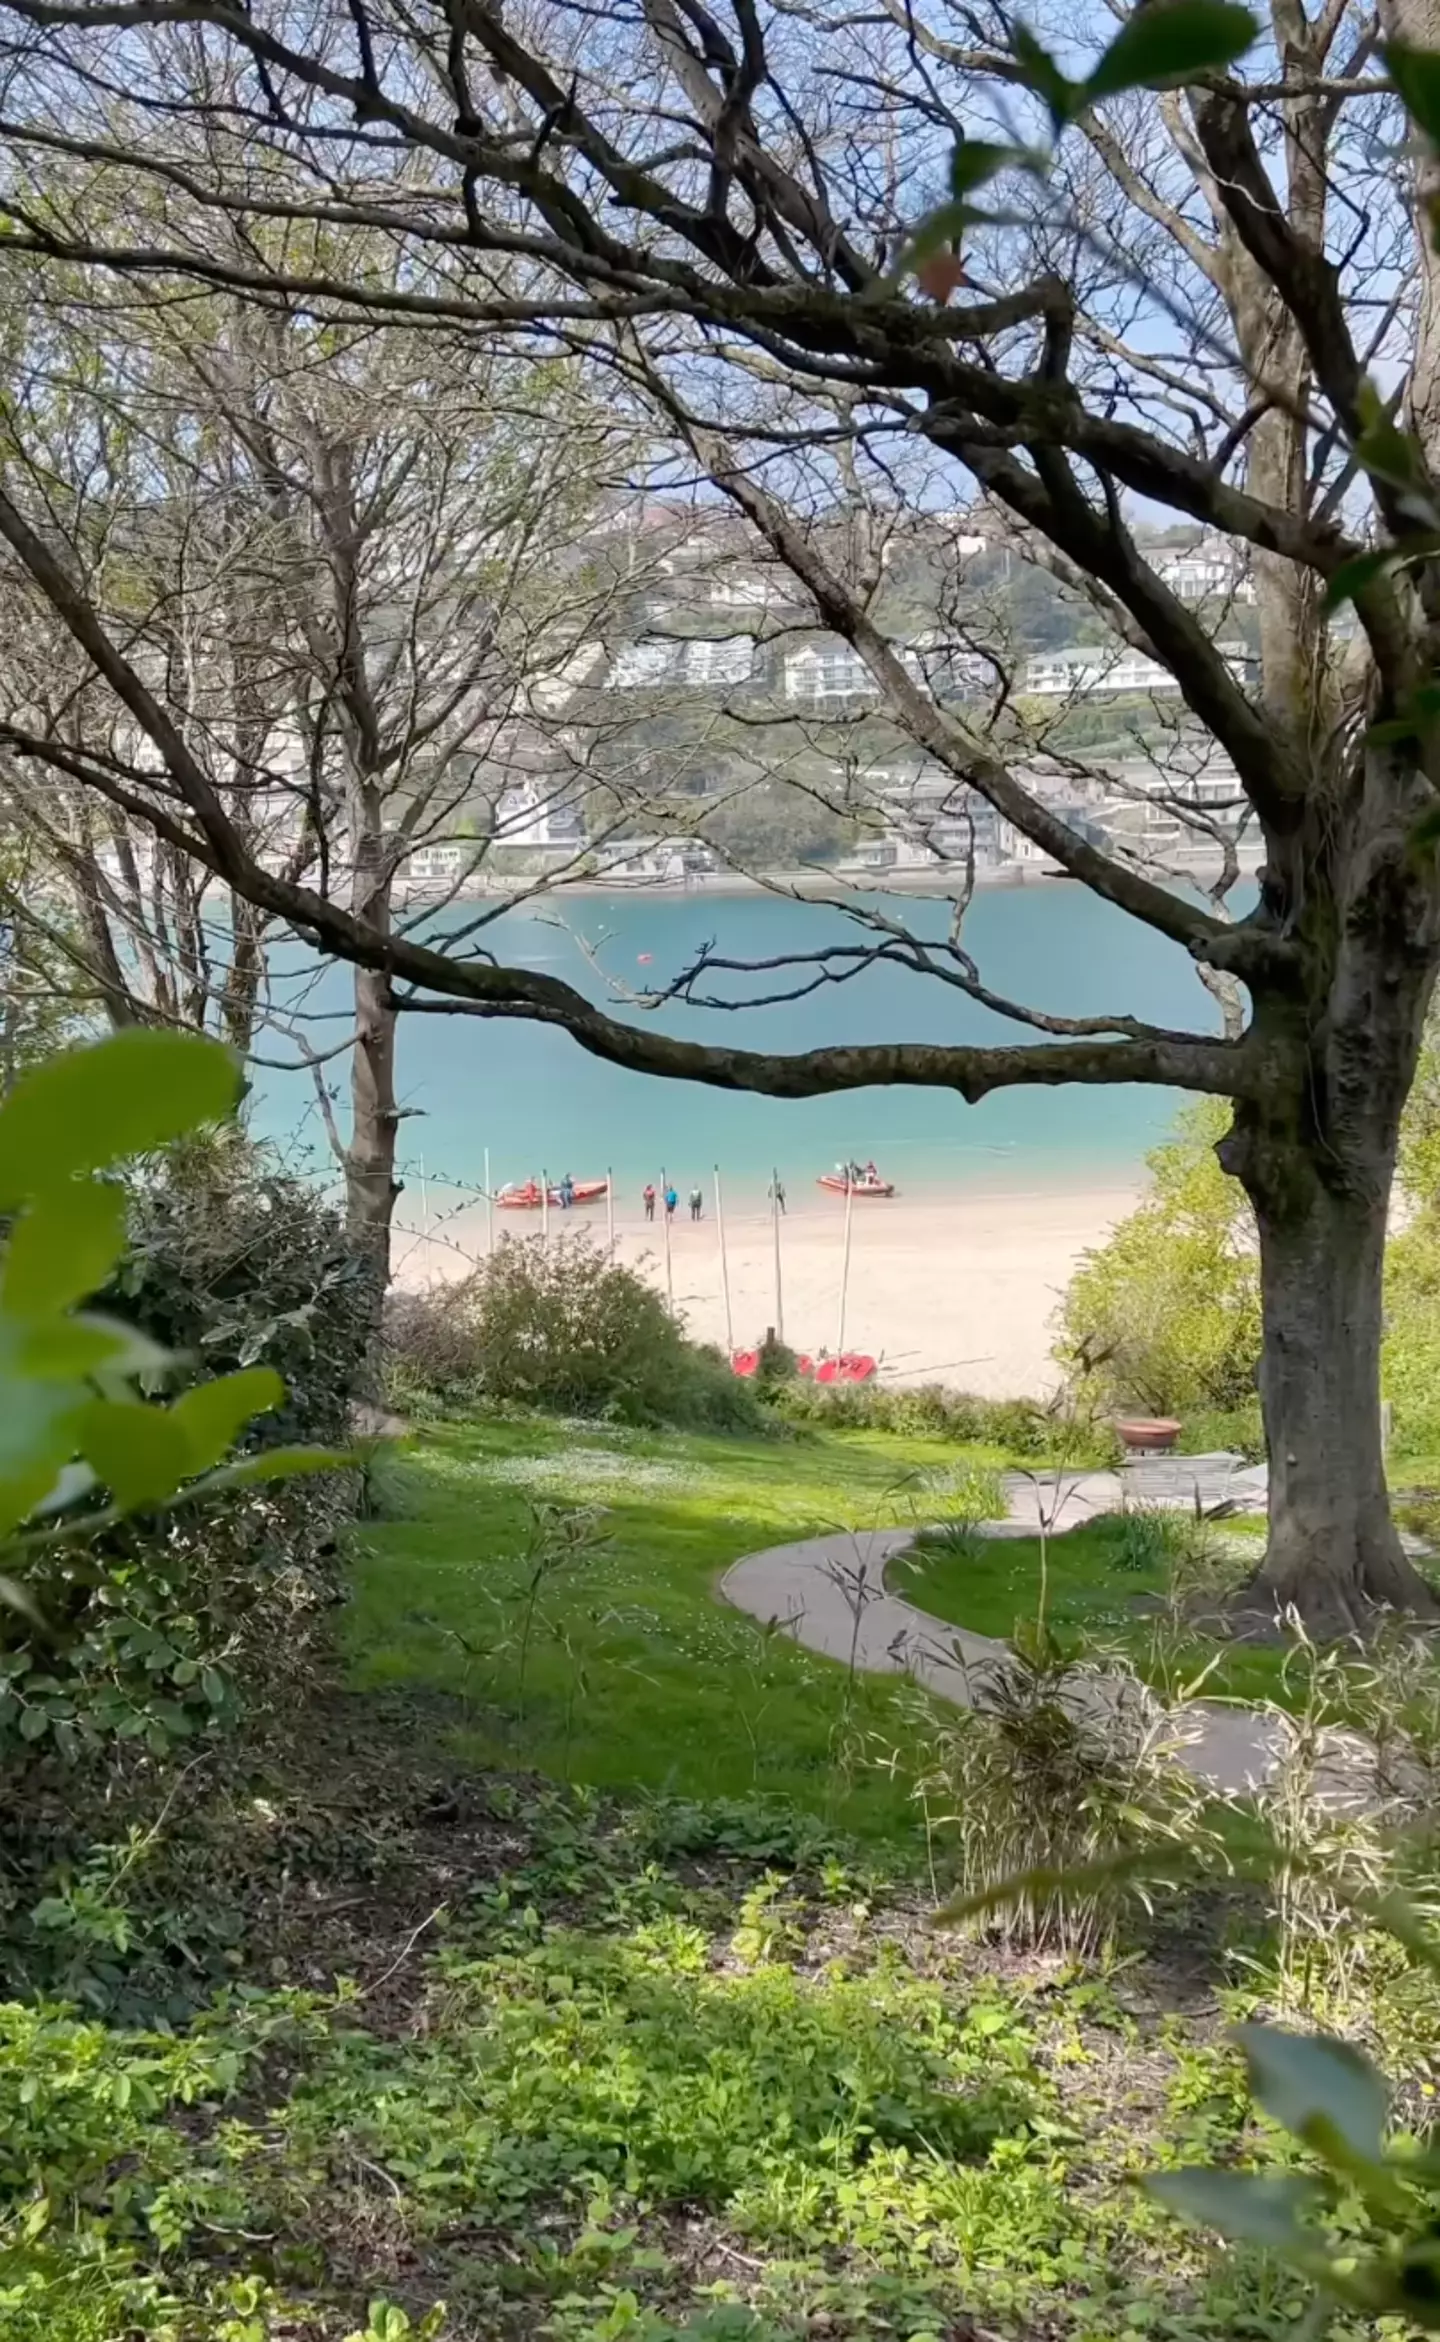 Have you ever been to Salcombe?